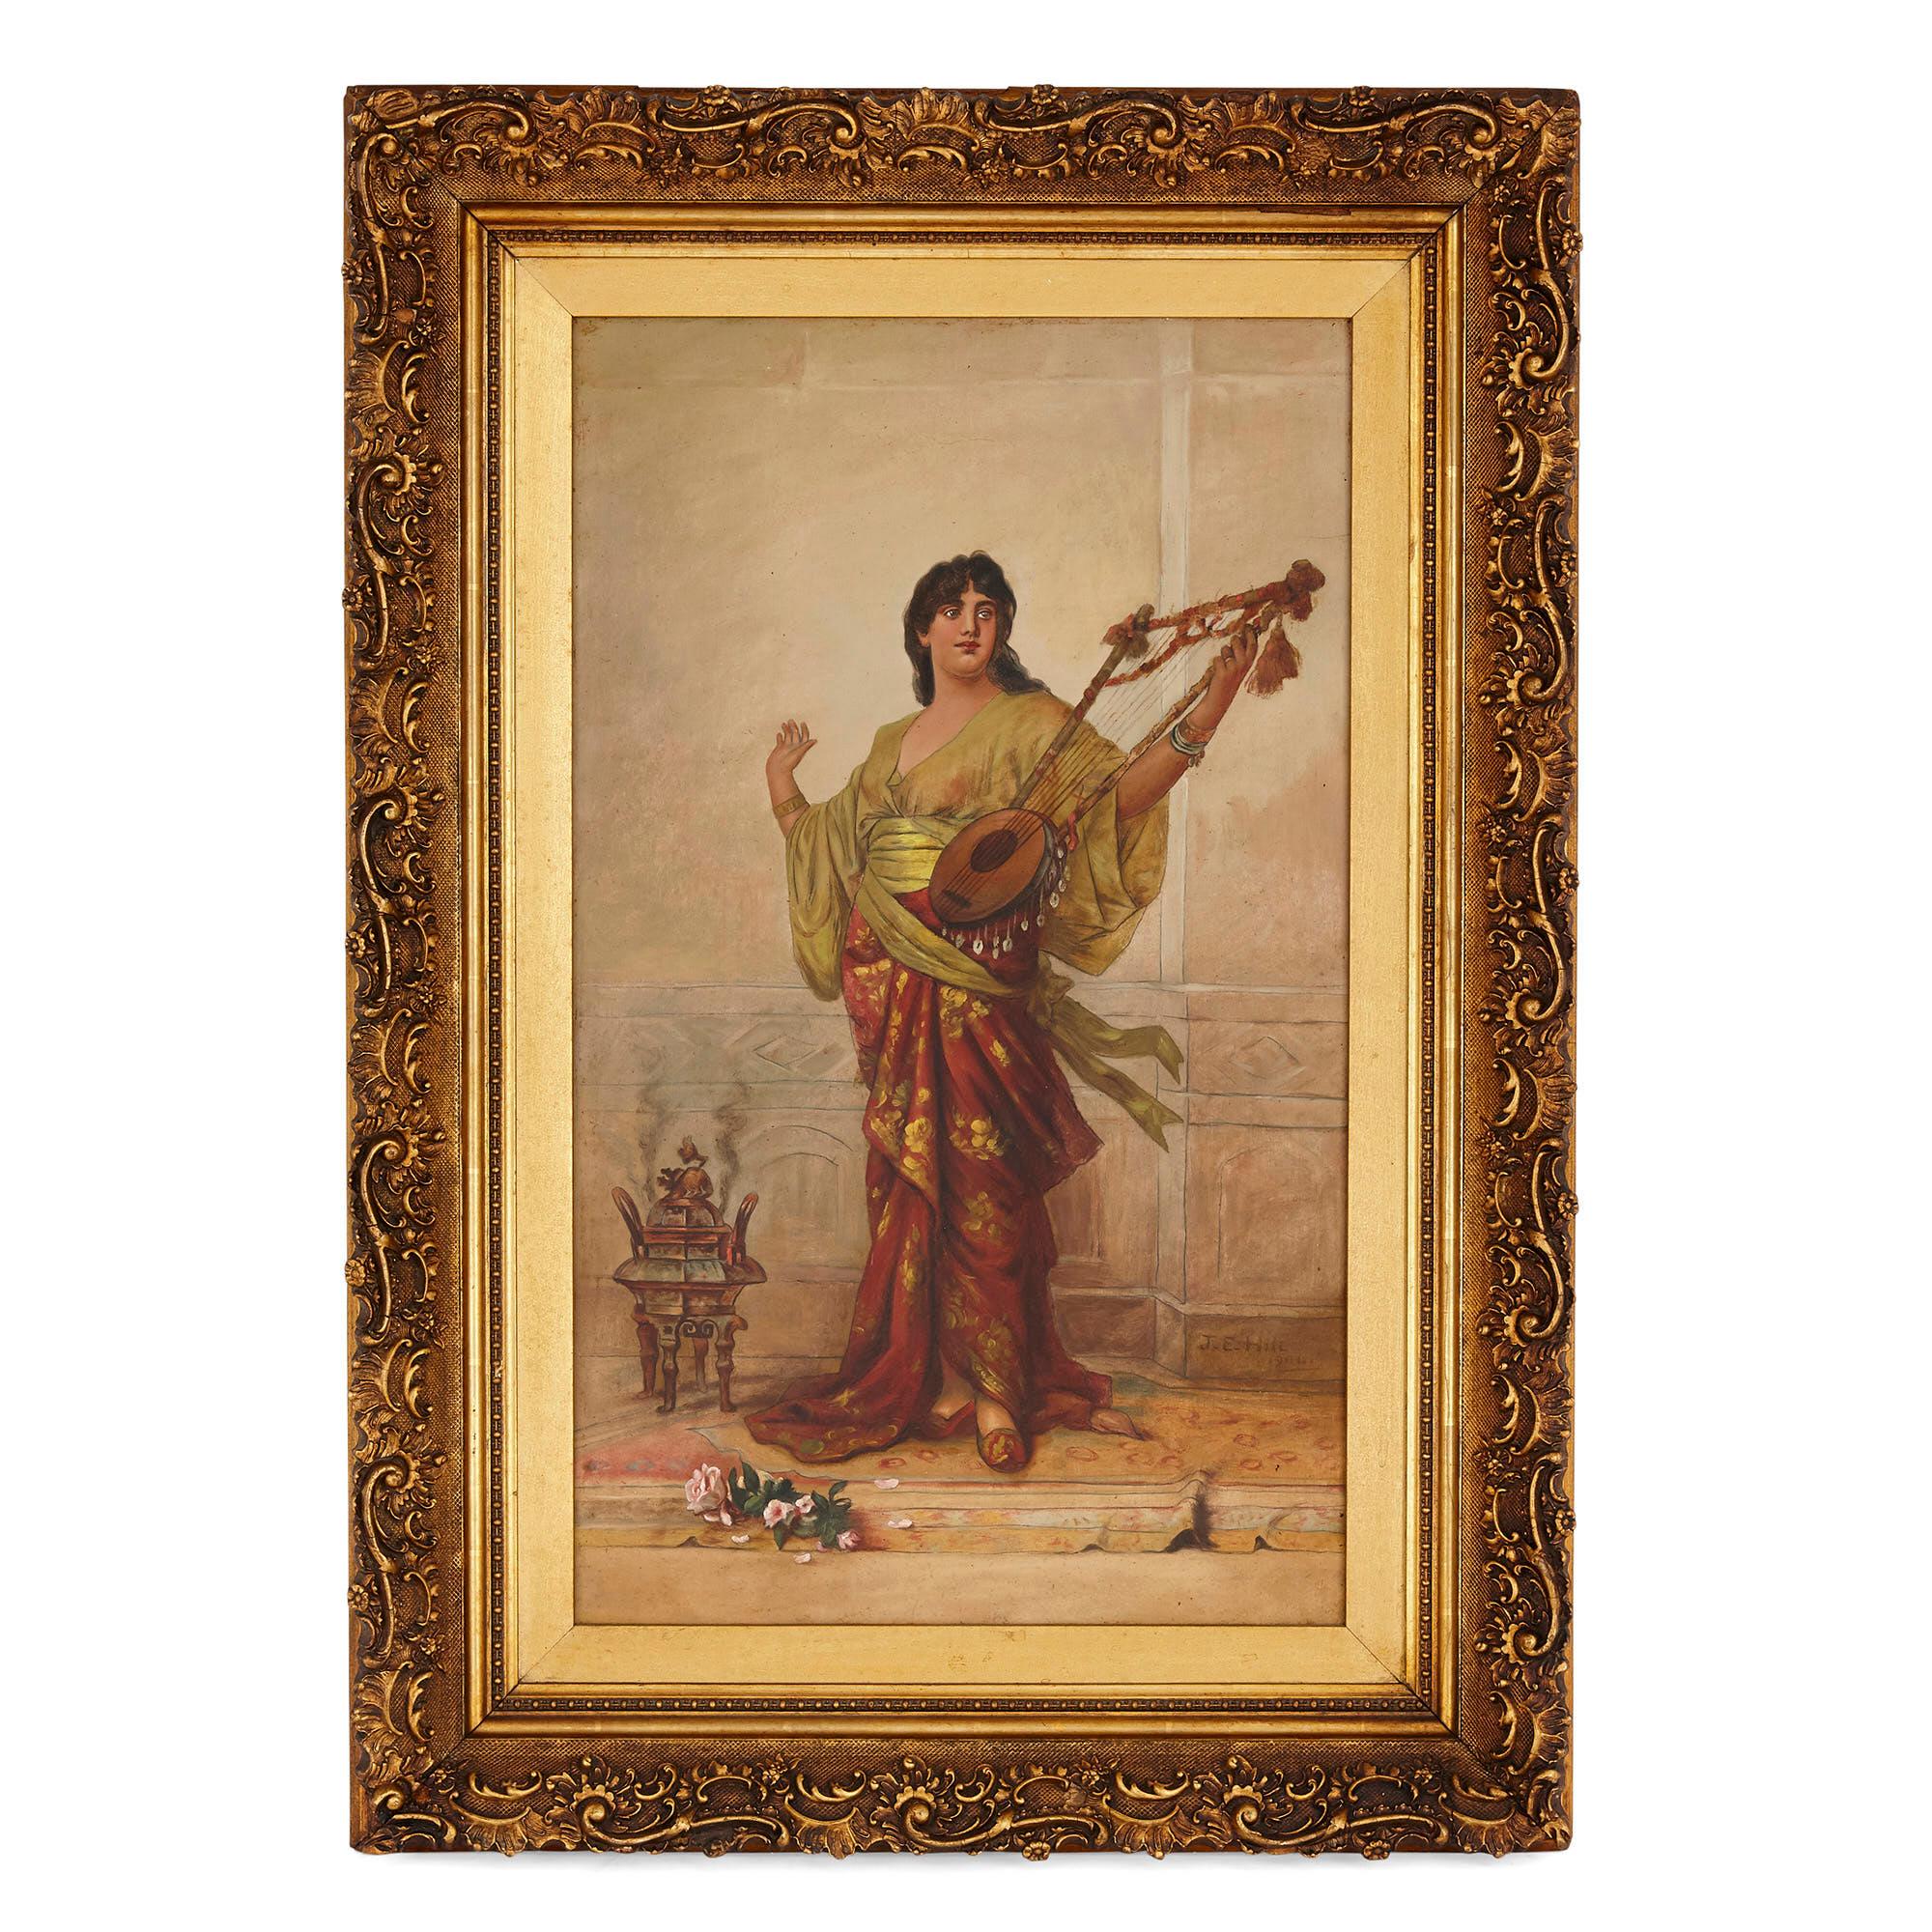 Pair of figurative Orientalist oil paintings by Hill - Aesthetic Movement Painting by J. E. Hill